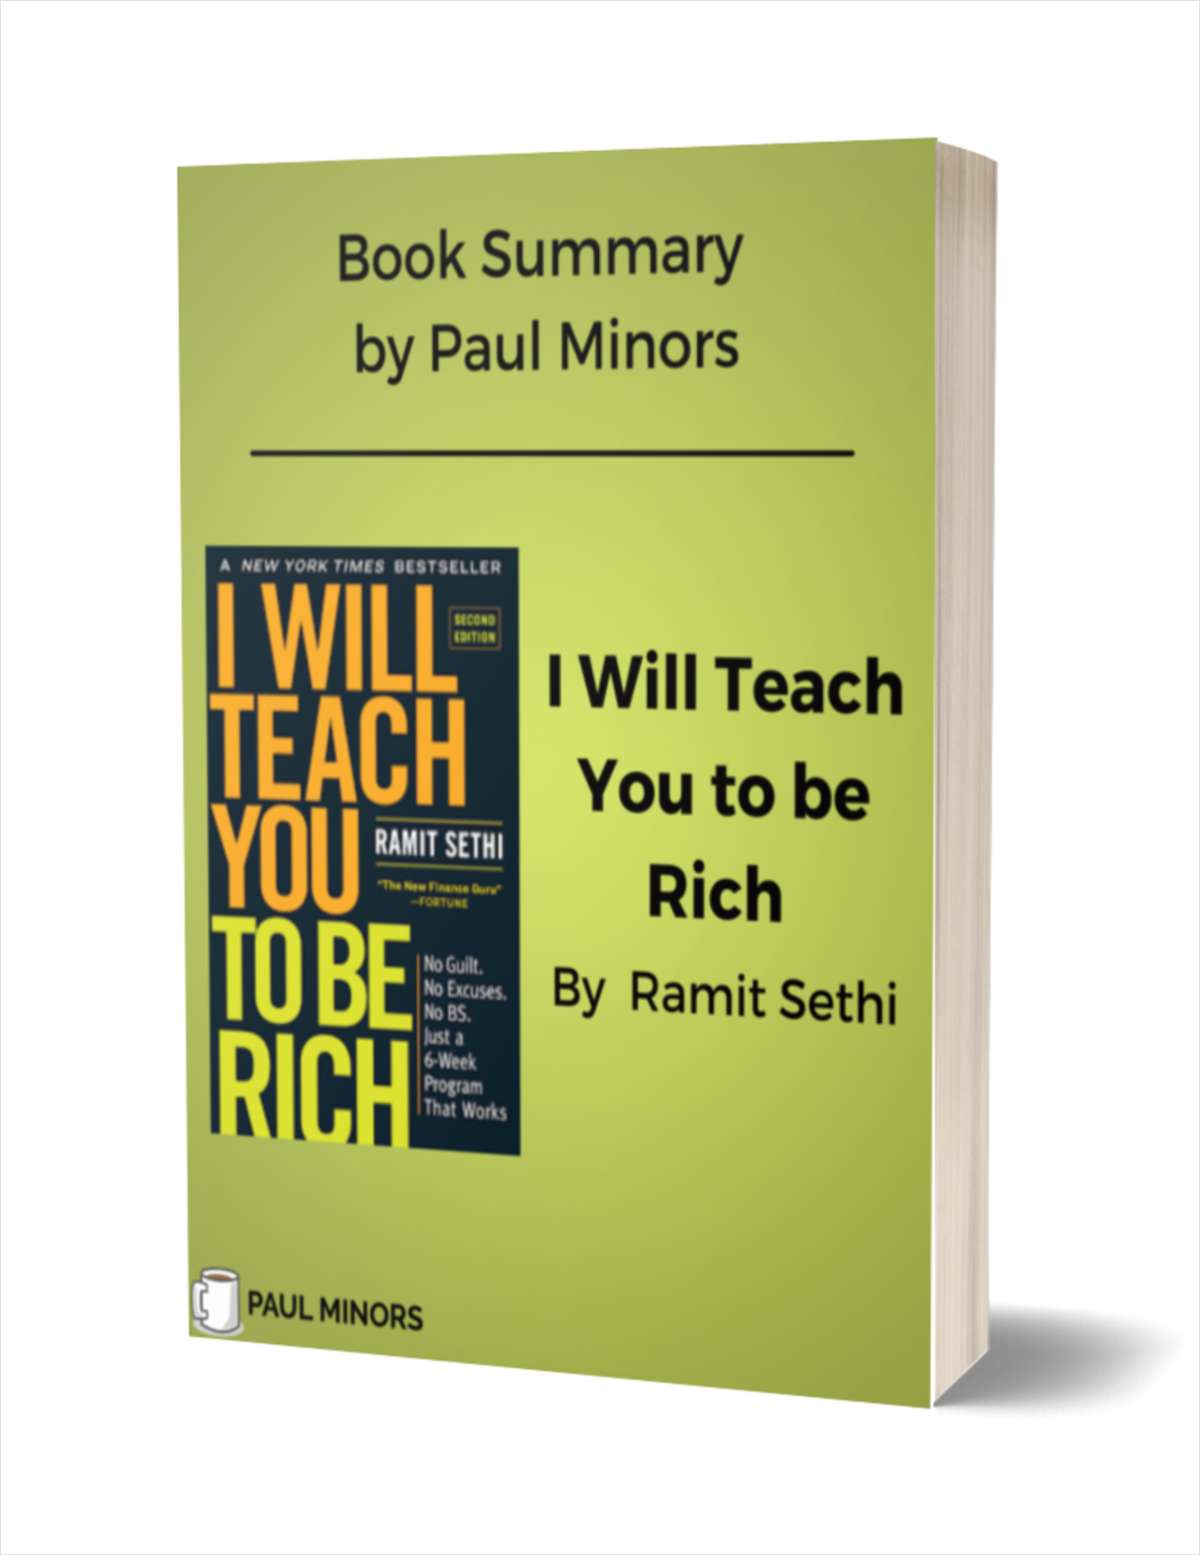 I Will Teach You to be Rich Book Summary - Limited Time Offer